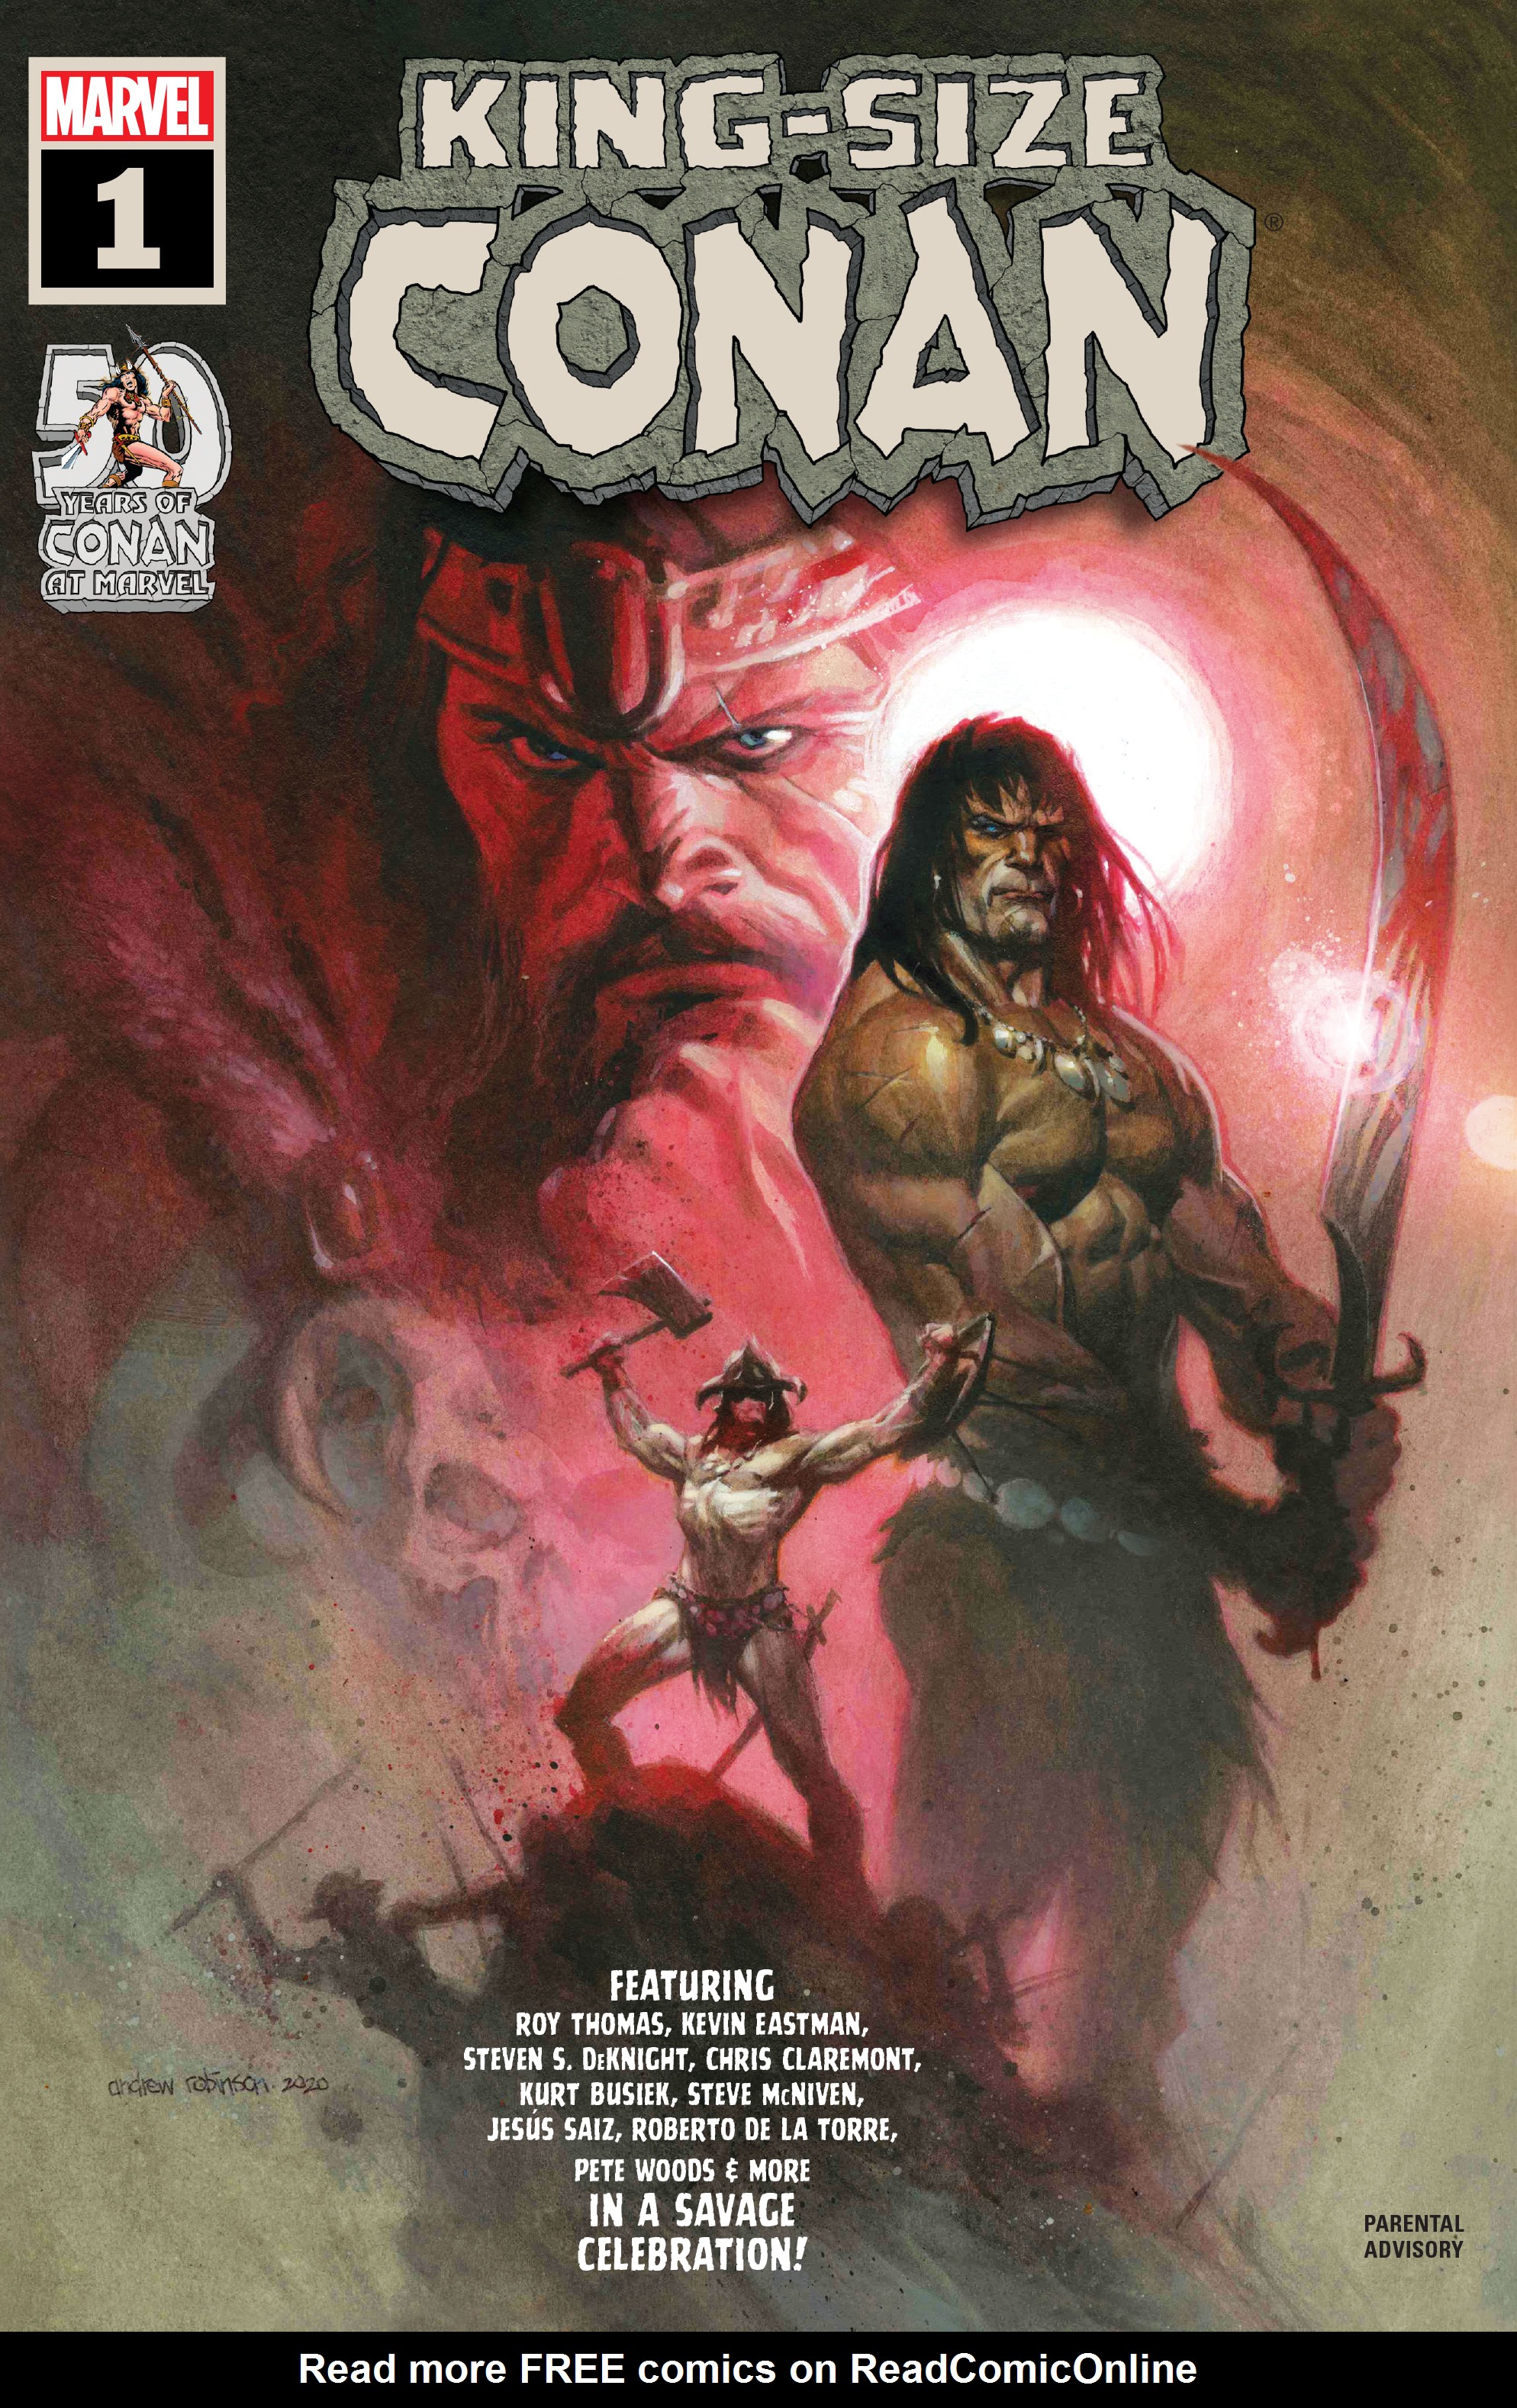 Read online King-Size Conan comic -  Issue # Full - 1